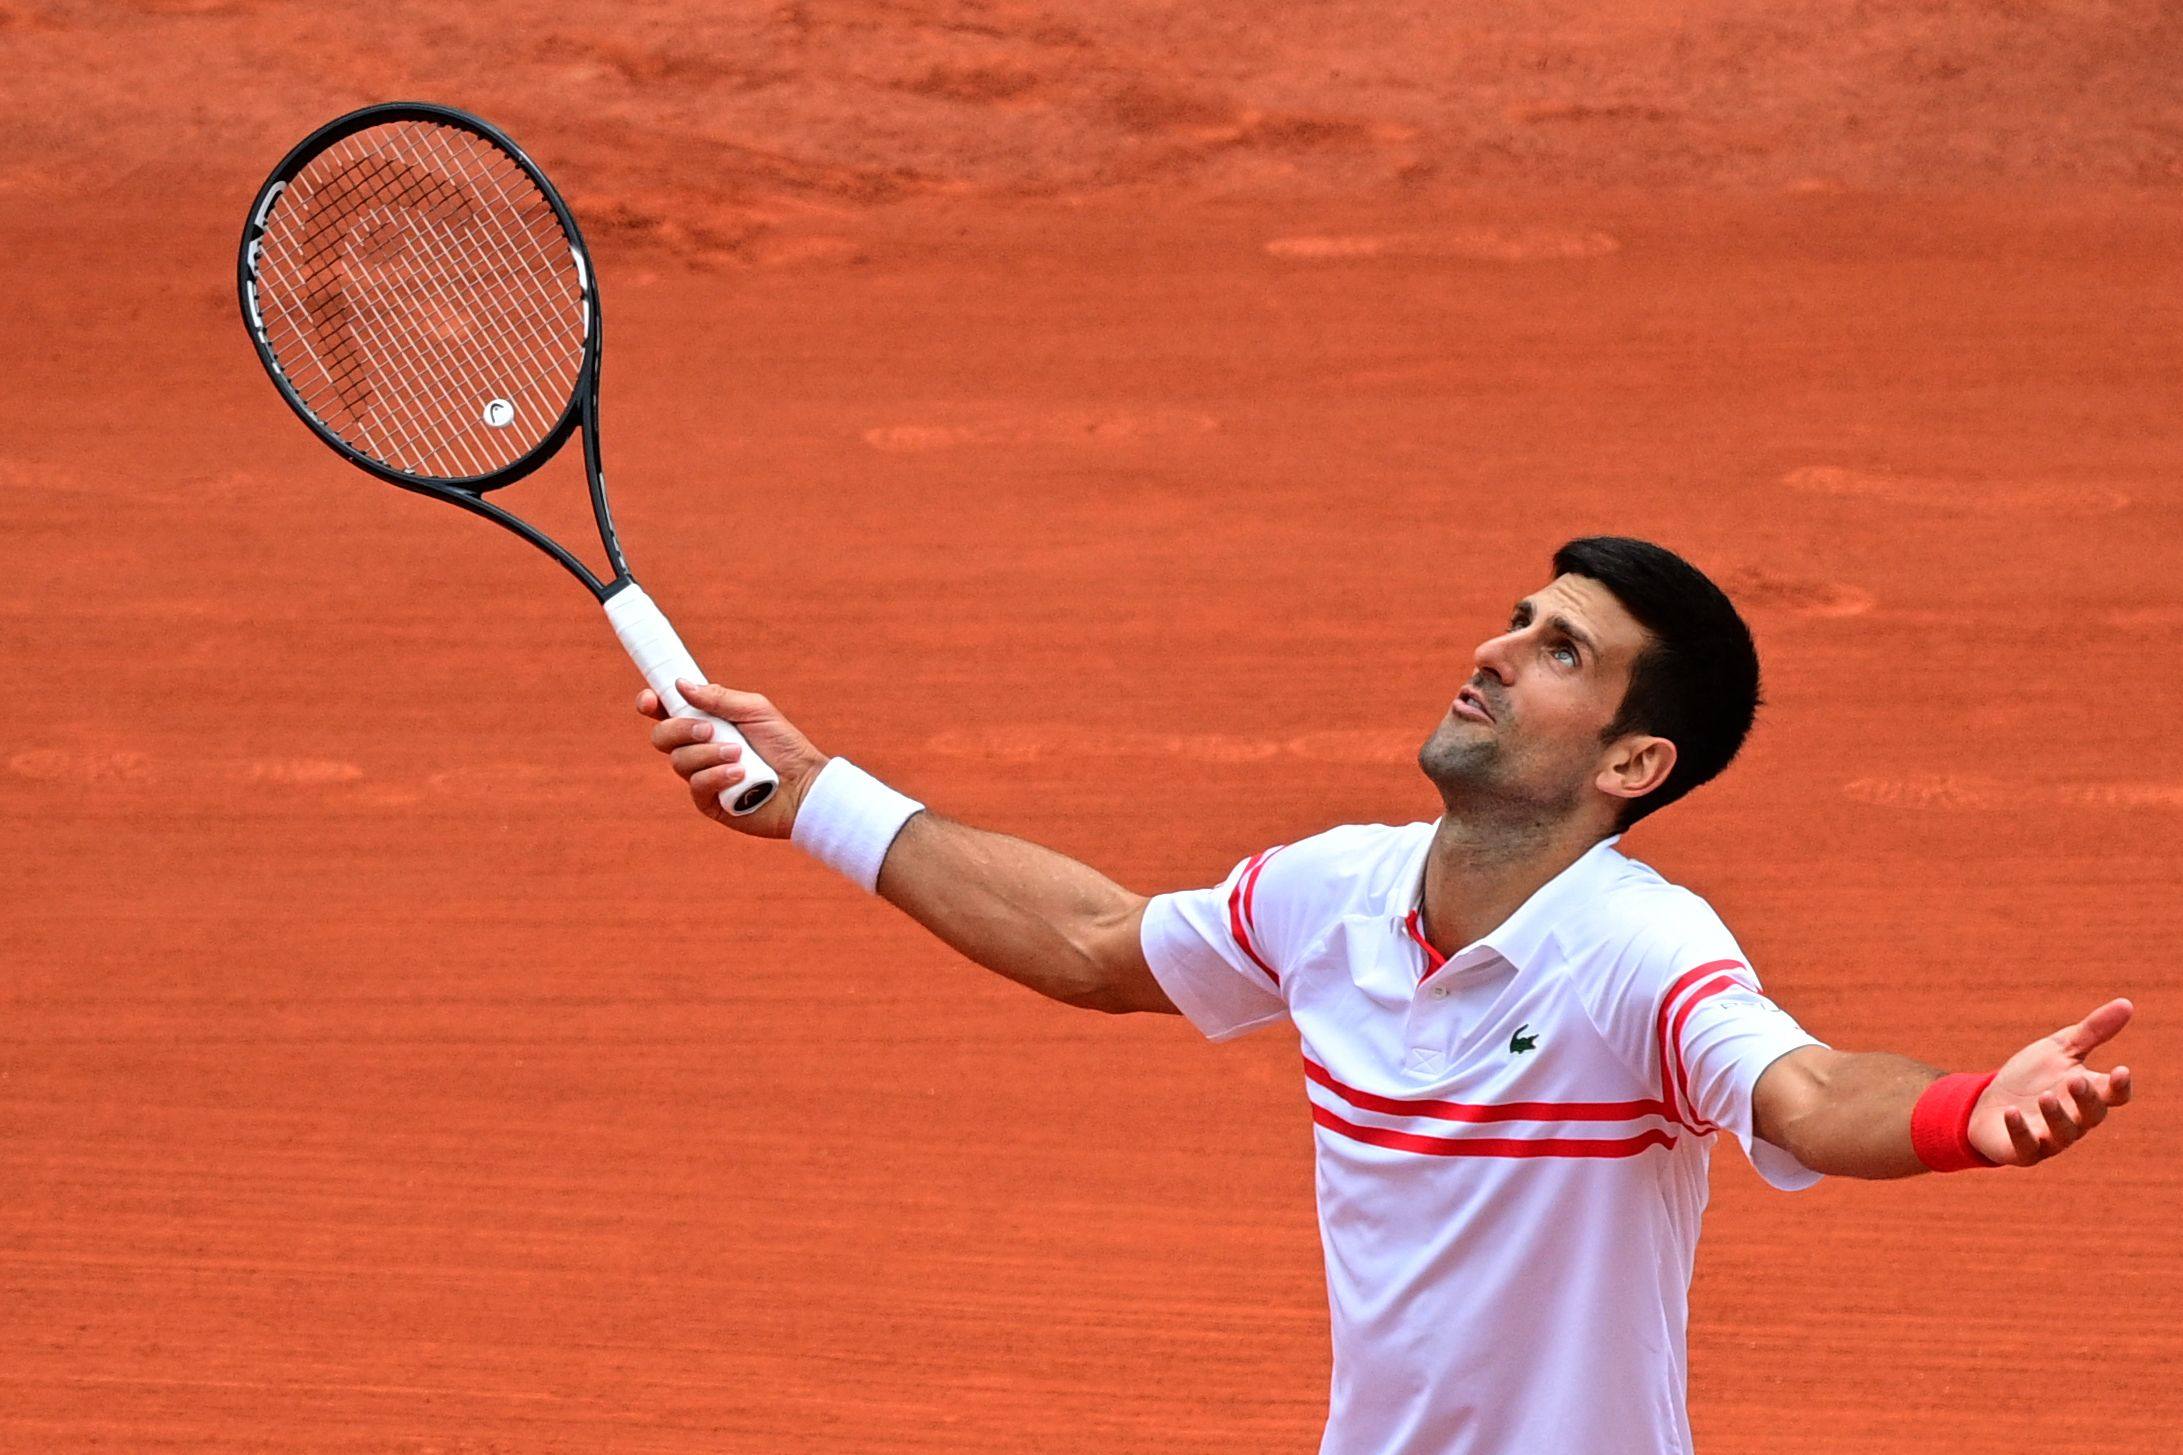 Serbia’s Novak Djokovic reacts after winning a point against Italy’s Lorenzo Musetti during his men’s singles fourth round tennis match at the 2021 French Open in Paris. Photo: AFP